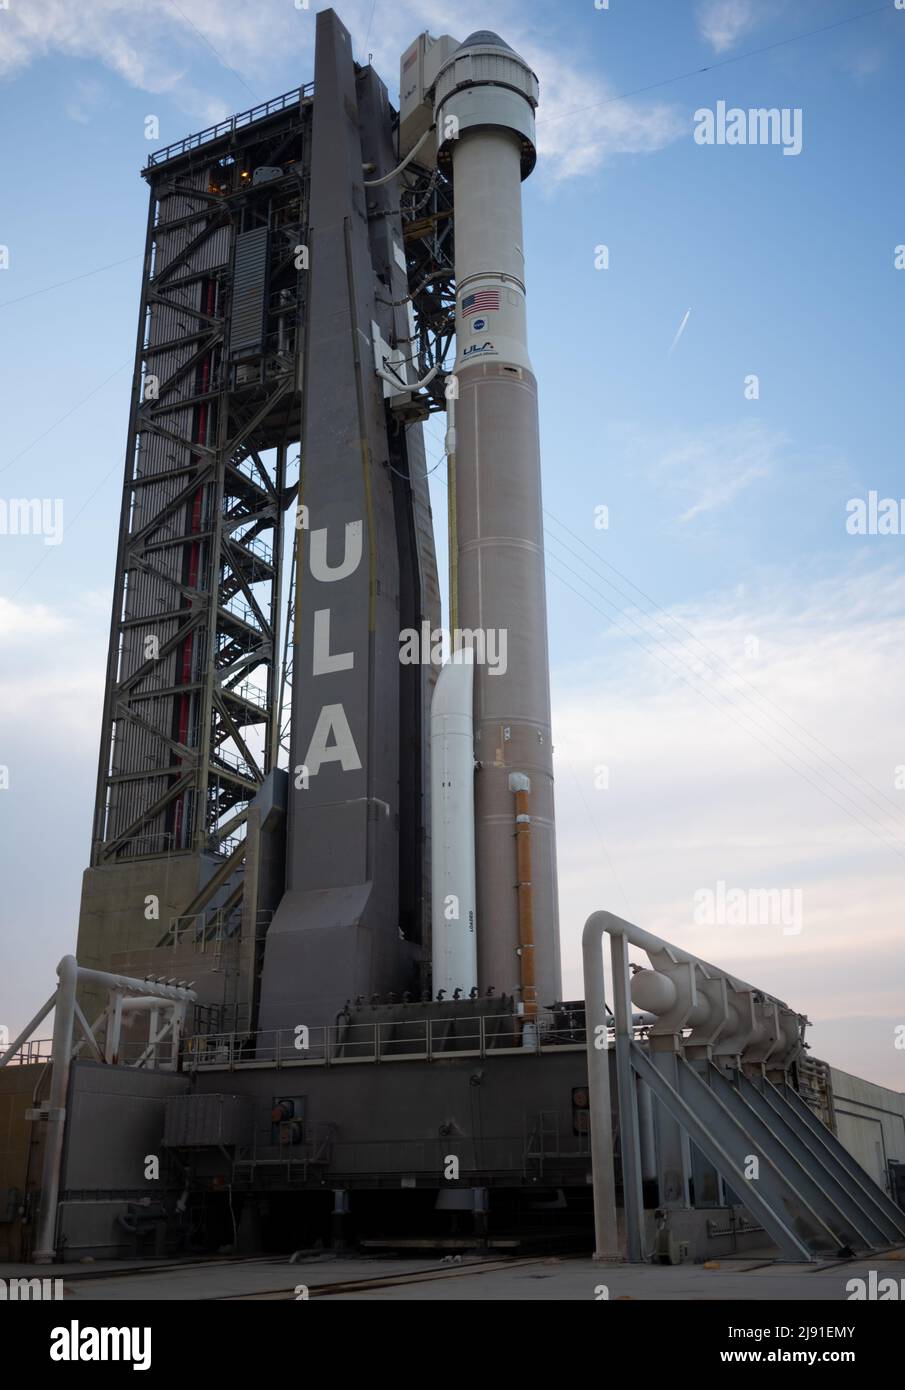 Cape Canaveral, United States of America. 18 May, 2022. The United Launch Alliance Atlas V rocket carrying the Boeing CST-100 Starliner spacecraft aboard at Space Launch Complex 41 ahead of the Orbital Flight Test-2 mission at Cape Canaveral Space Force Station, May 18, 2022 in Cape Canaveral, Florida. The Flight Test-2 will be second un-crewed flight test and will dock to the International Space Station. Credit: Joel Kowsky/NASA/Alamy Live News Stock Photo